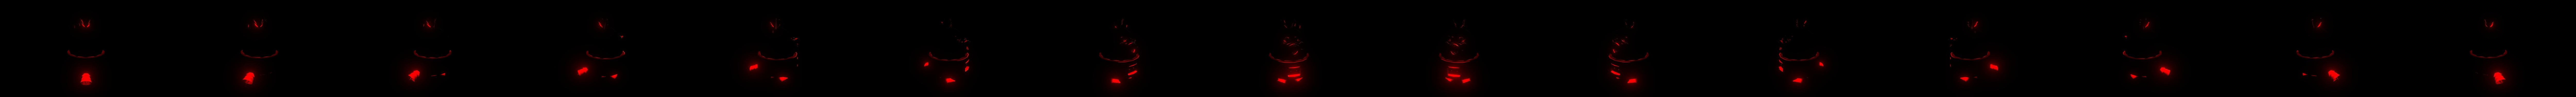 Mama Tattletail Rigged - Download Free 3D model by Fnalowh (@Fnalowh)  [5e7f668]